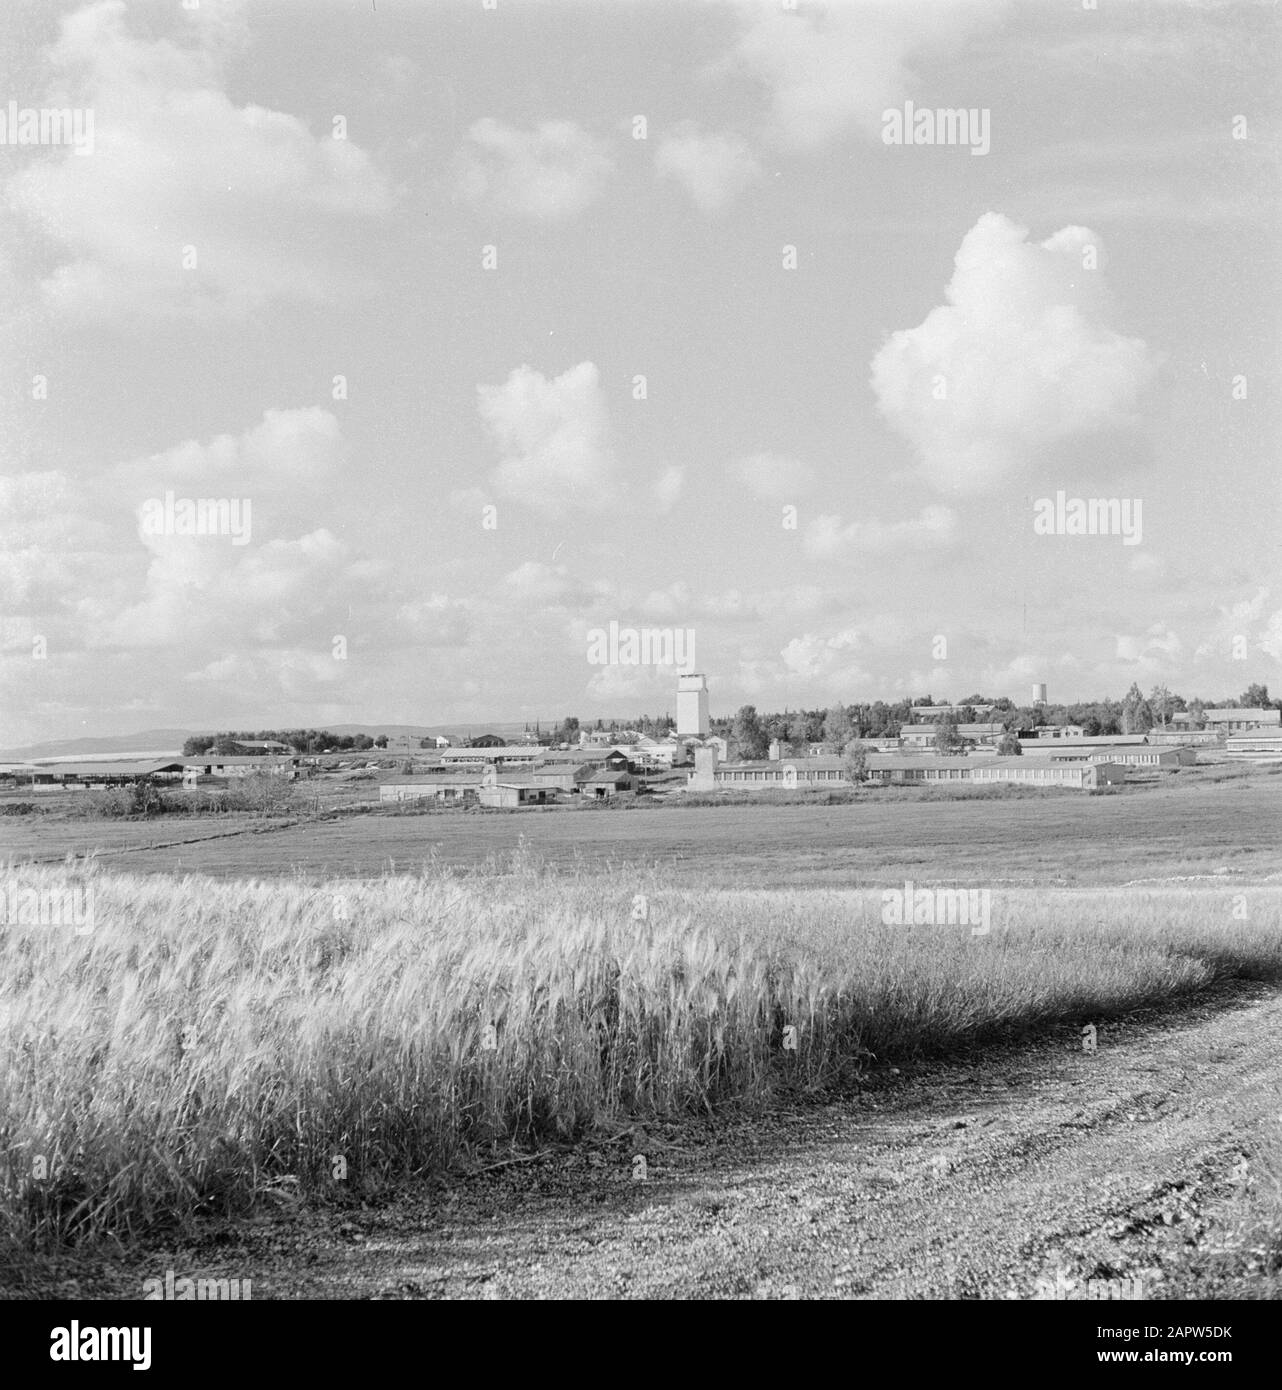 Israel 1964-1965. Gal'ed  Kibbutz Gal'ed. Panorama with the kibbutz in the distance and with in the foreground a field with ripening grain Annotation: Gal'ed (also called Even Yitzhak) is a kibbutz in the north of Israel, located in the plain of Menasse. Date: January 1, 1960 Location: Gal'ed, Israel Keywords: fields, cereals, kibbutz, panoramas Stock Photo